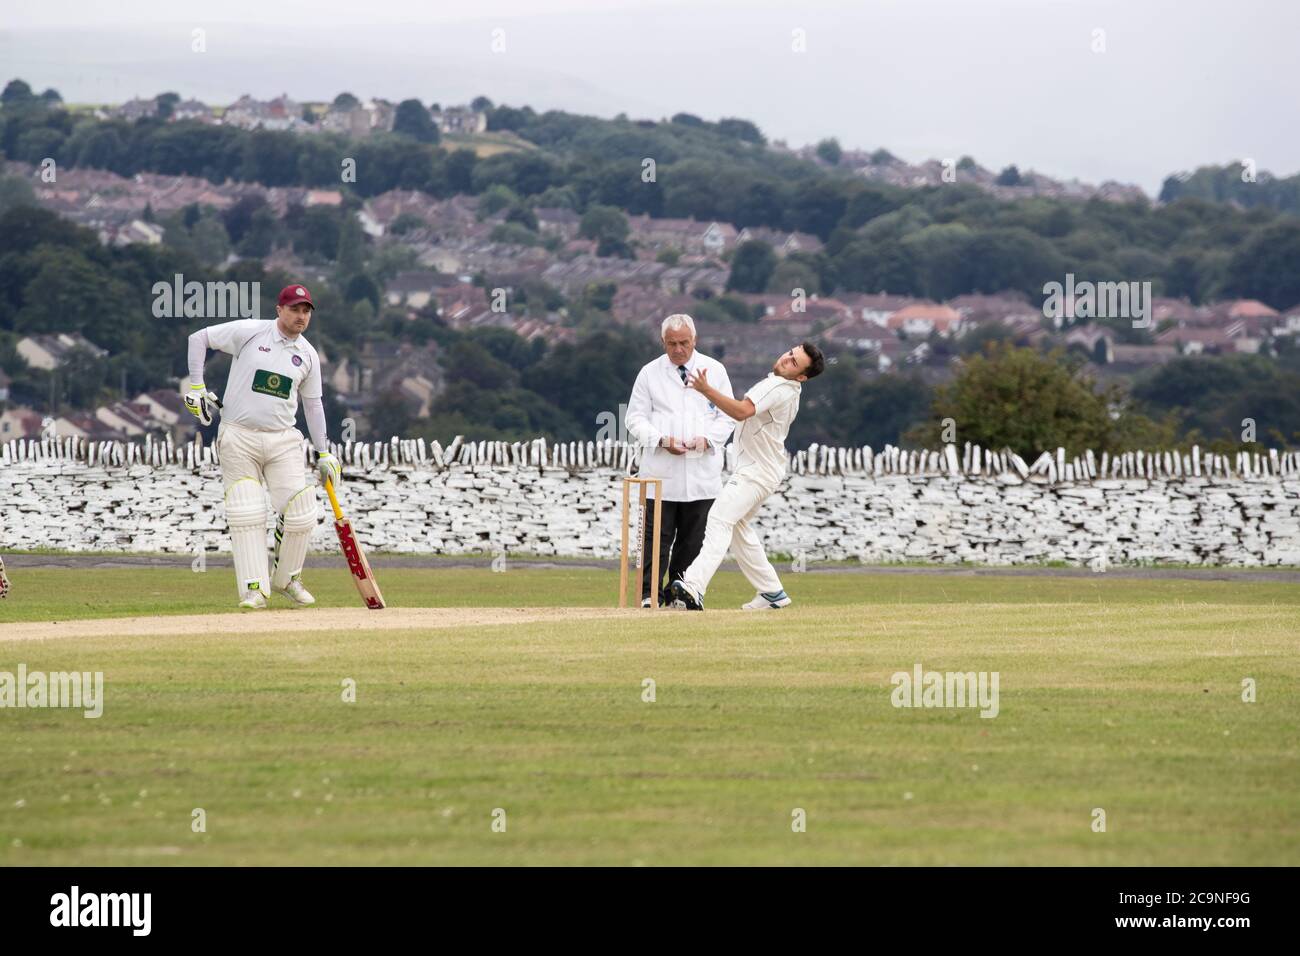 Bowler running past the umpire to bowl at a village cricket match in West Yorkshire U.K. Stock Photo